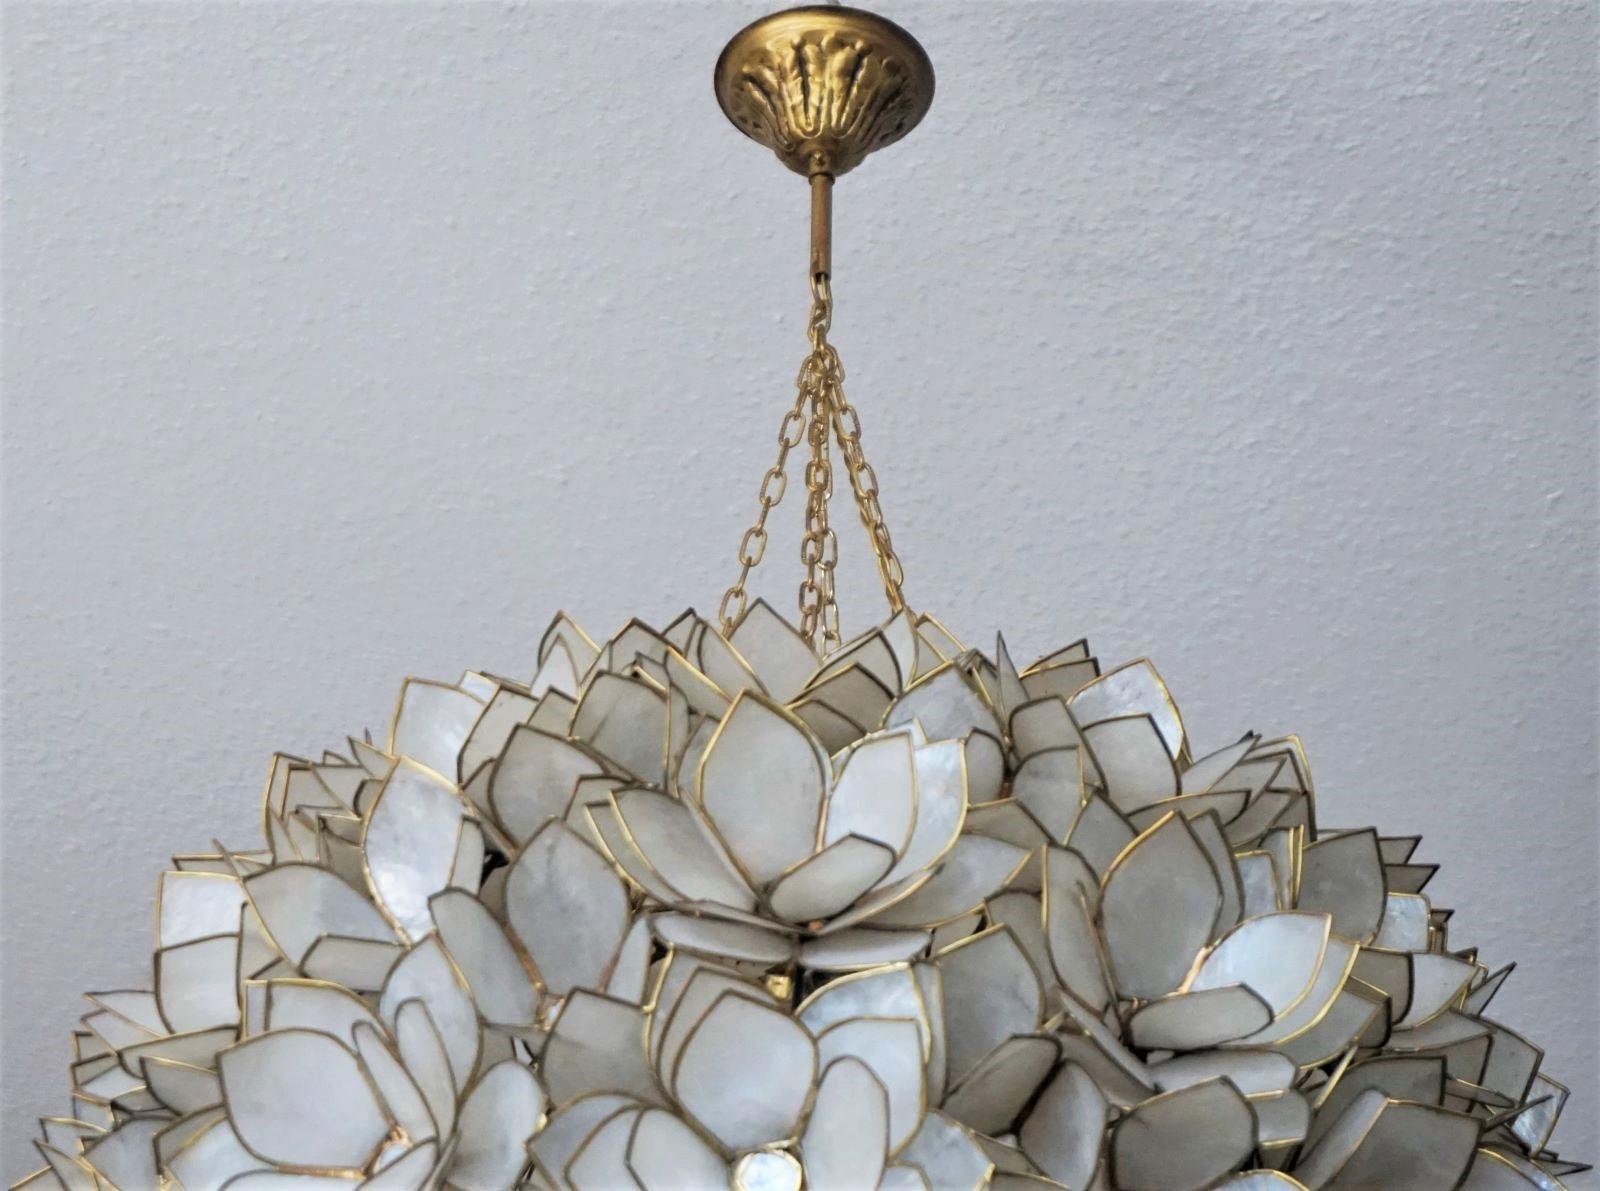 Art Deco Large Handcrafted Capiz Shell Three-Light Lotus Ball Chandelier by Rausch, 1960s